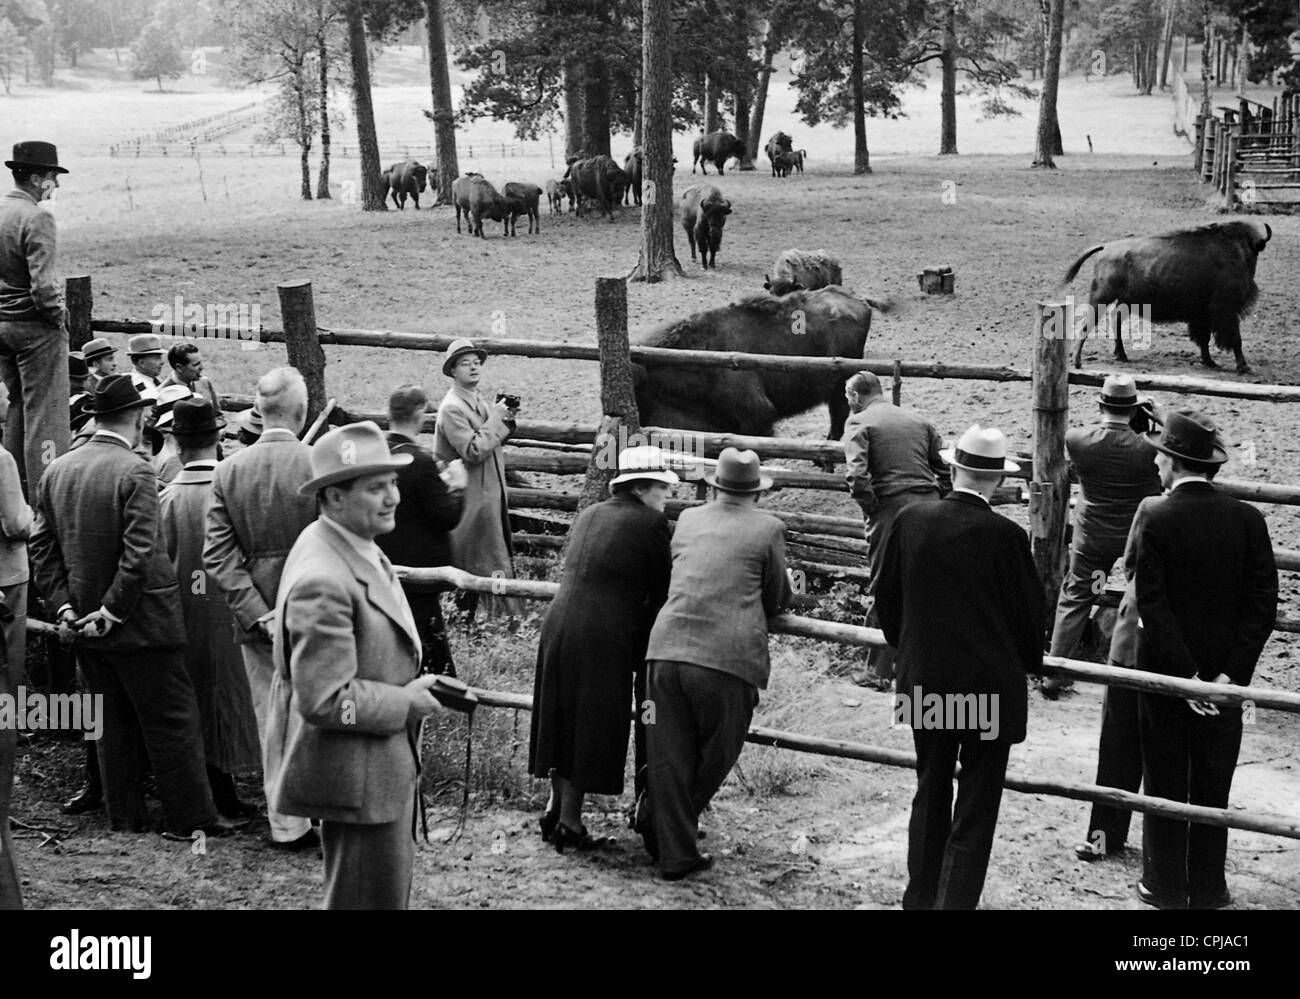 Guests visit the bison enclosure in the Schorfheide, 1938 Stock Photo